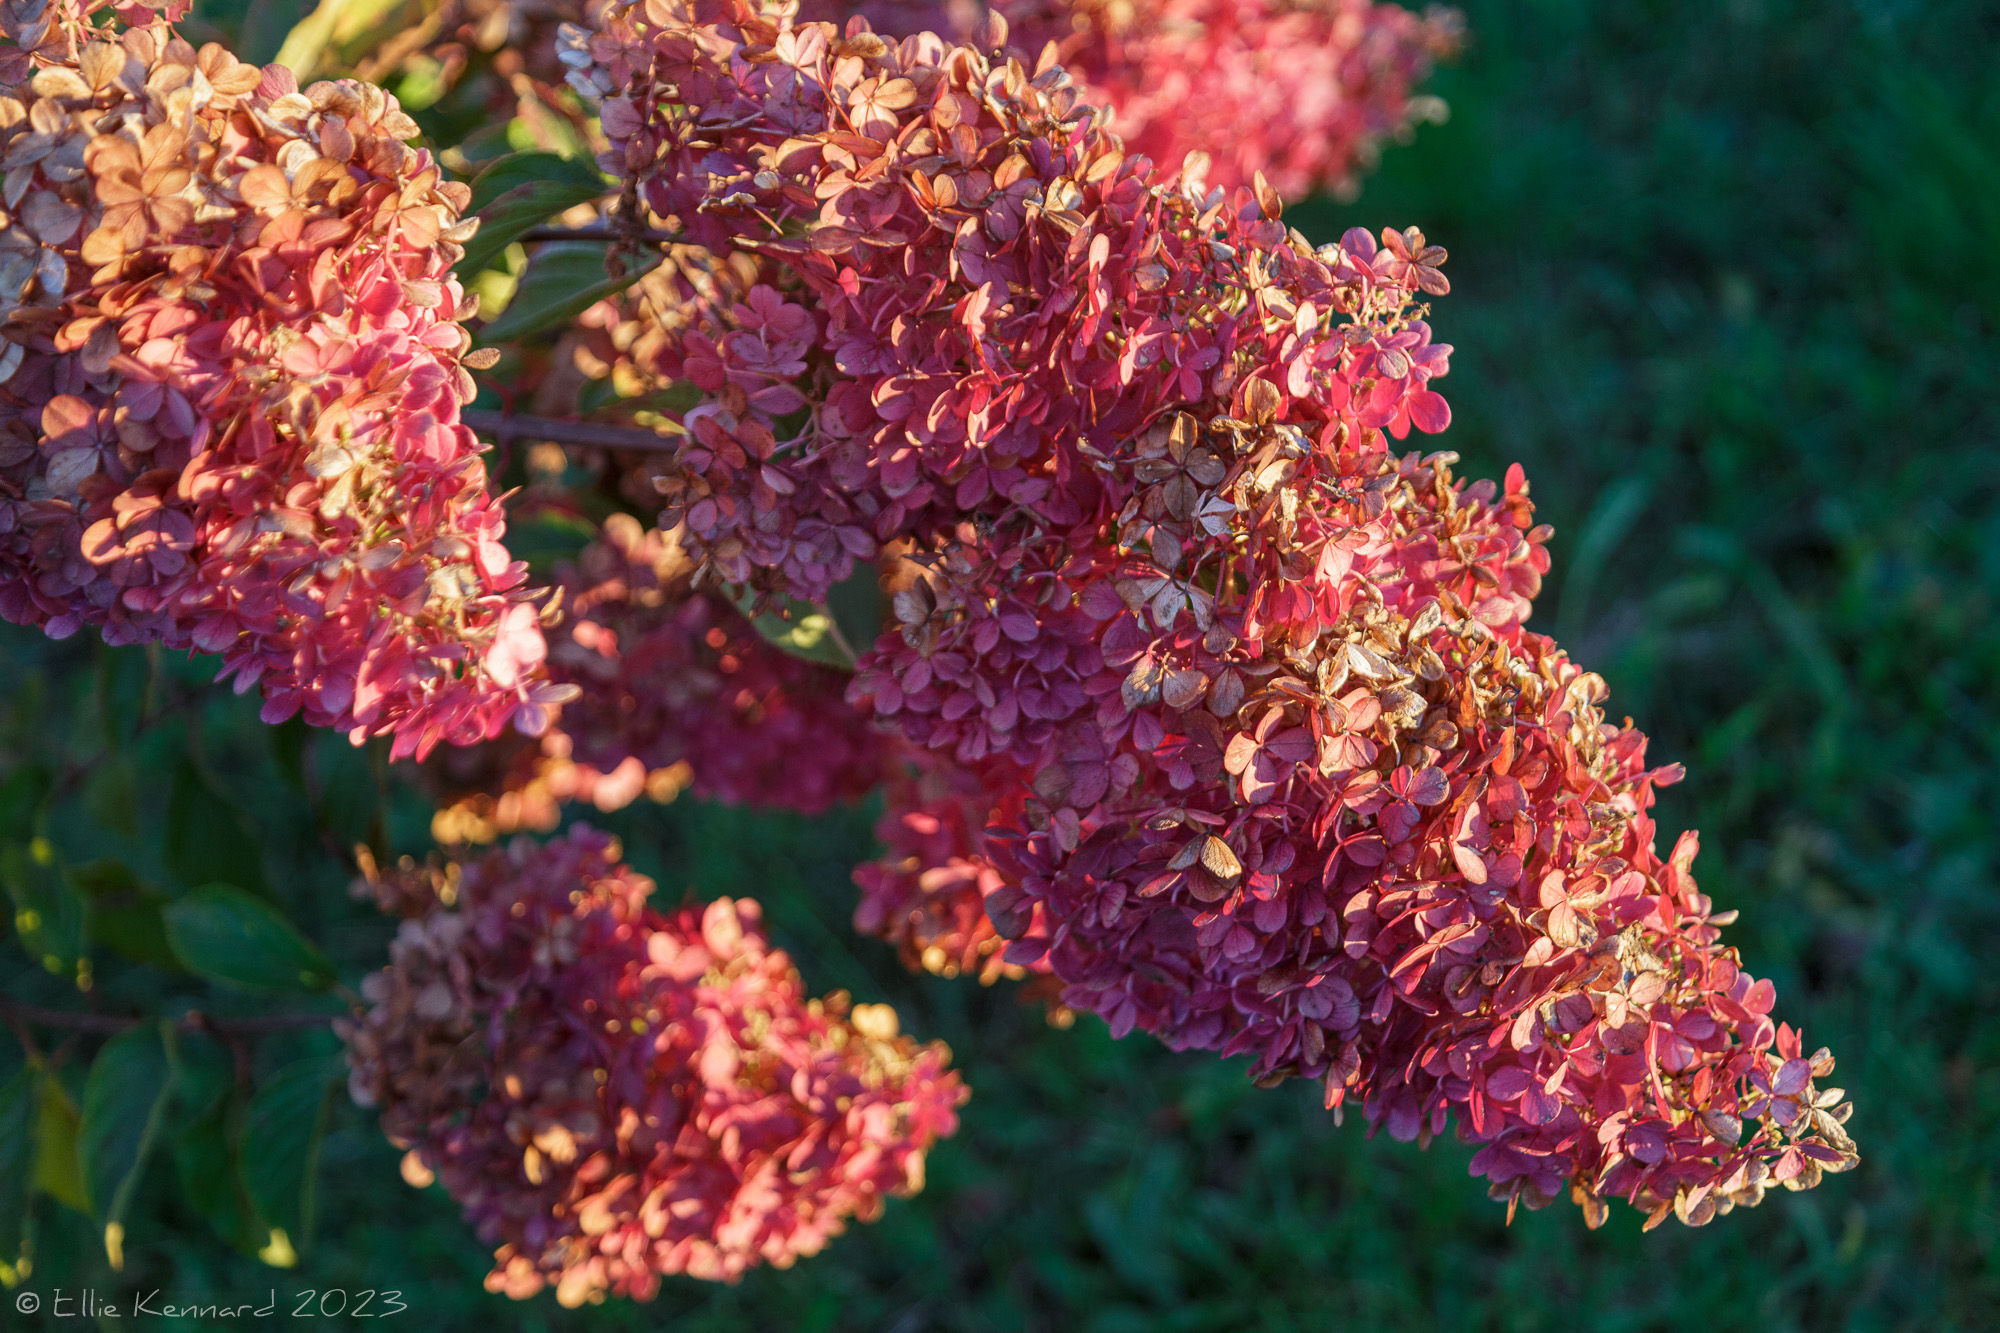 Dark pink and white hydrangea blooms hang from top left to lower right, lit from the right by a warm evening sun against a dark green background.